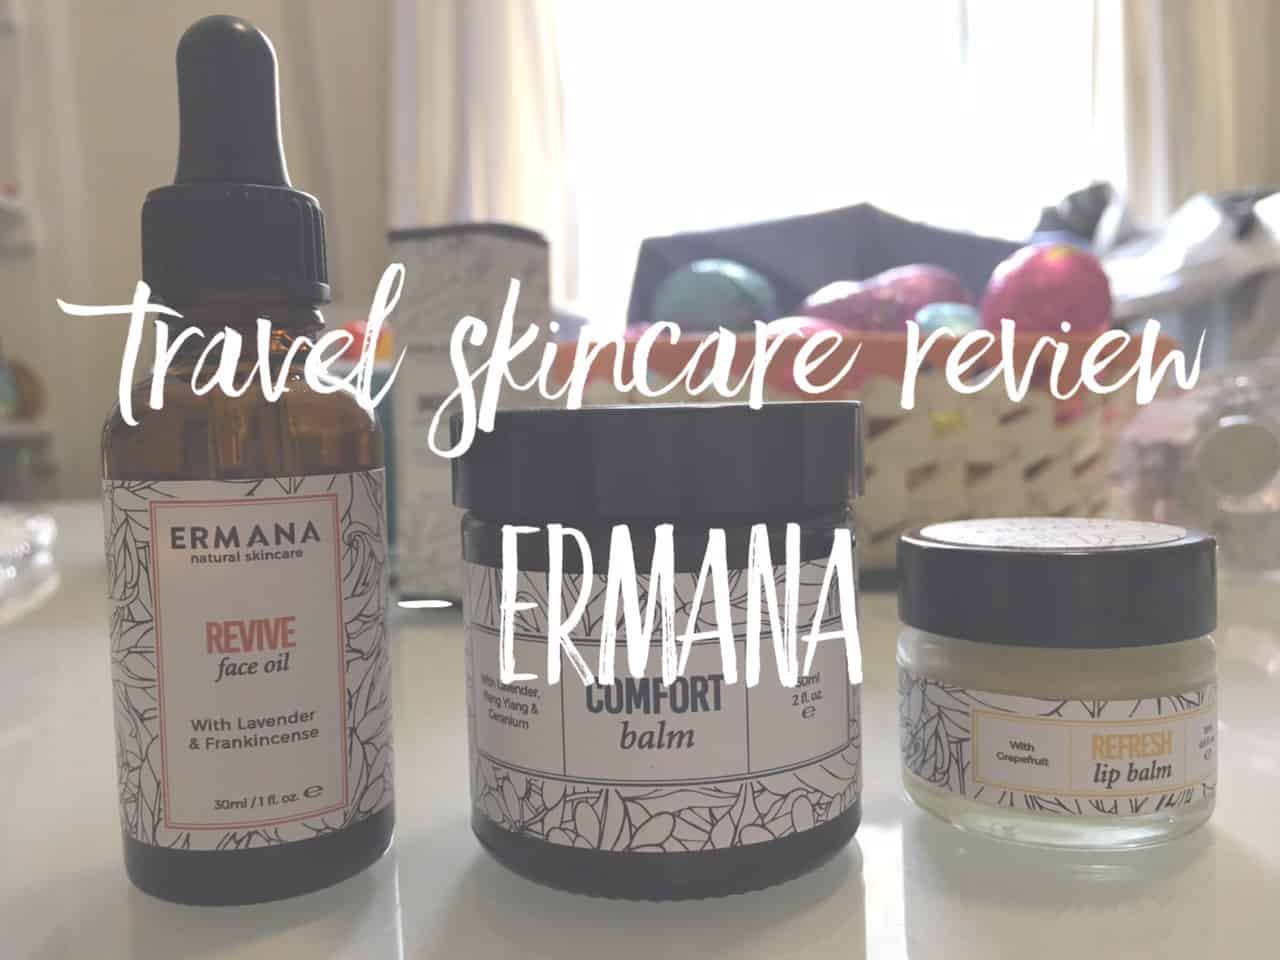 Best travel skincare routine using travel size natural cosmetics by Ermana